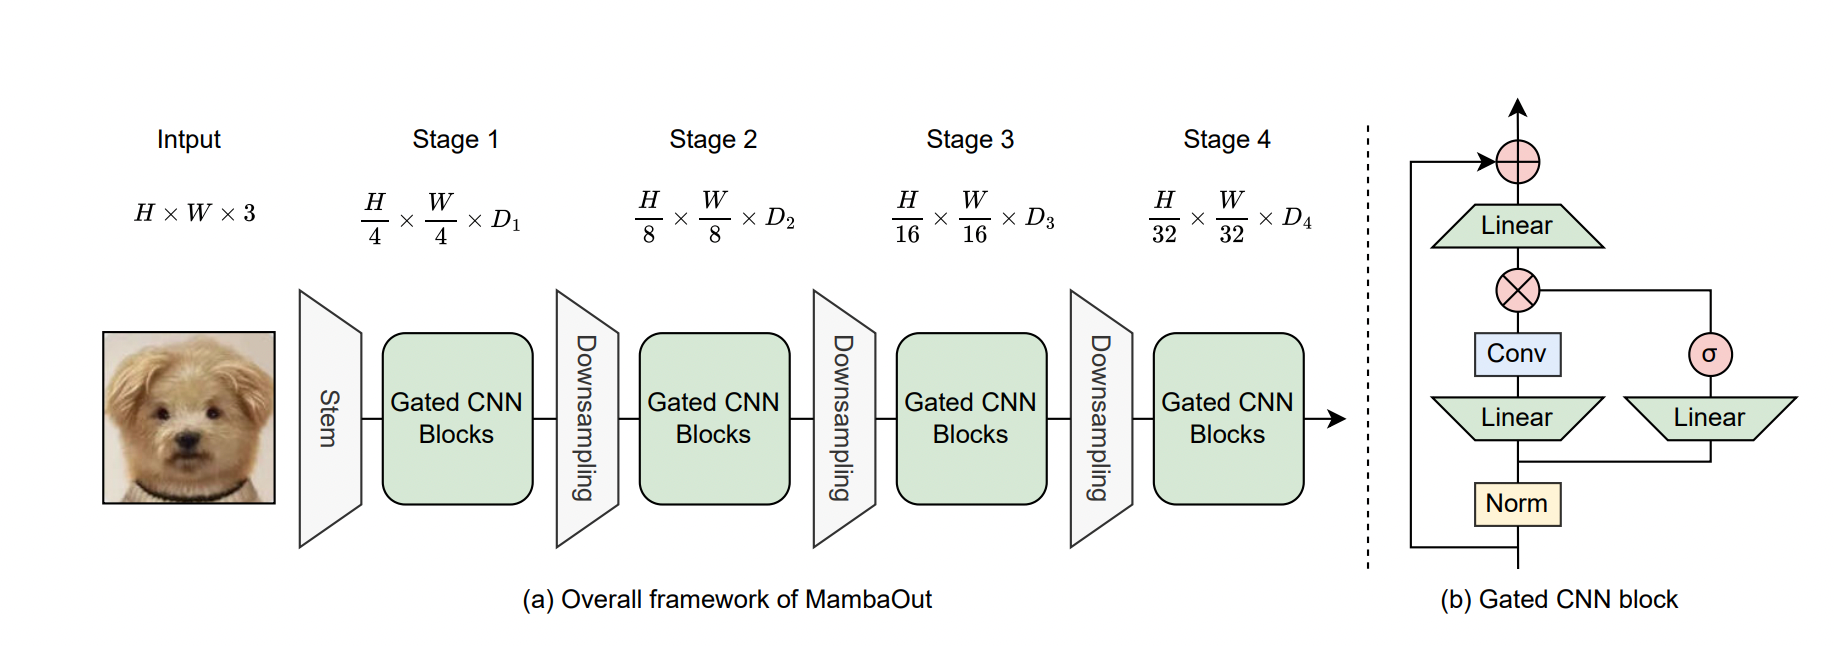 Overall framework of MambaOut